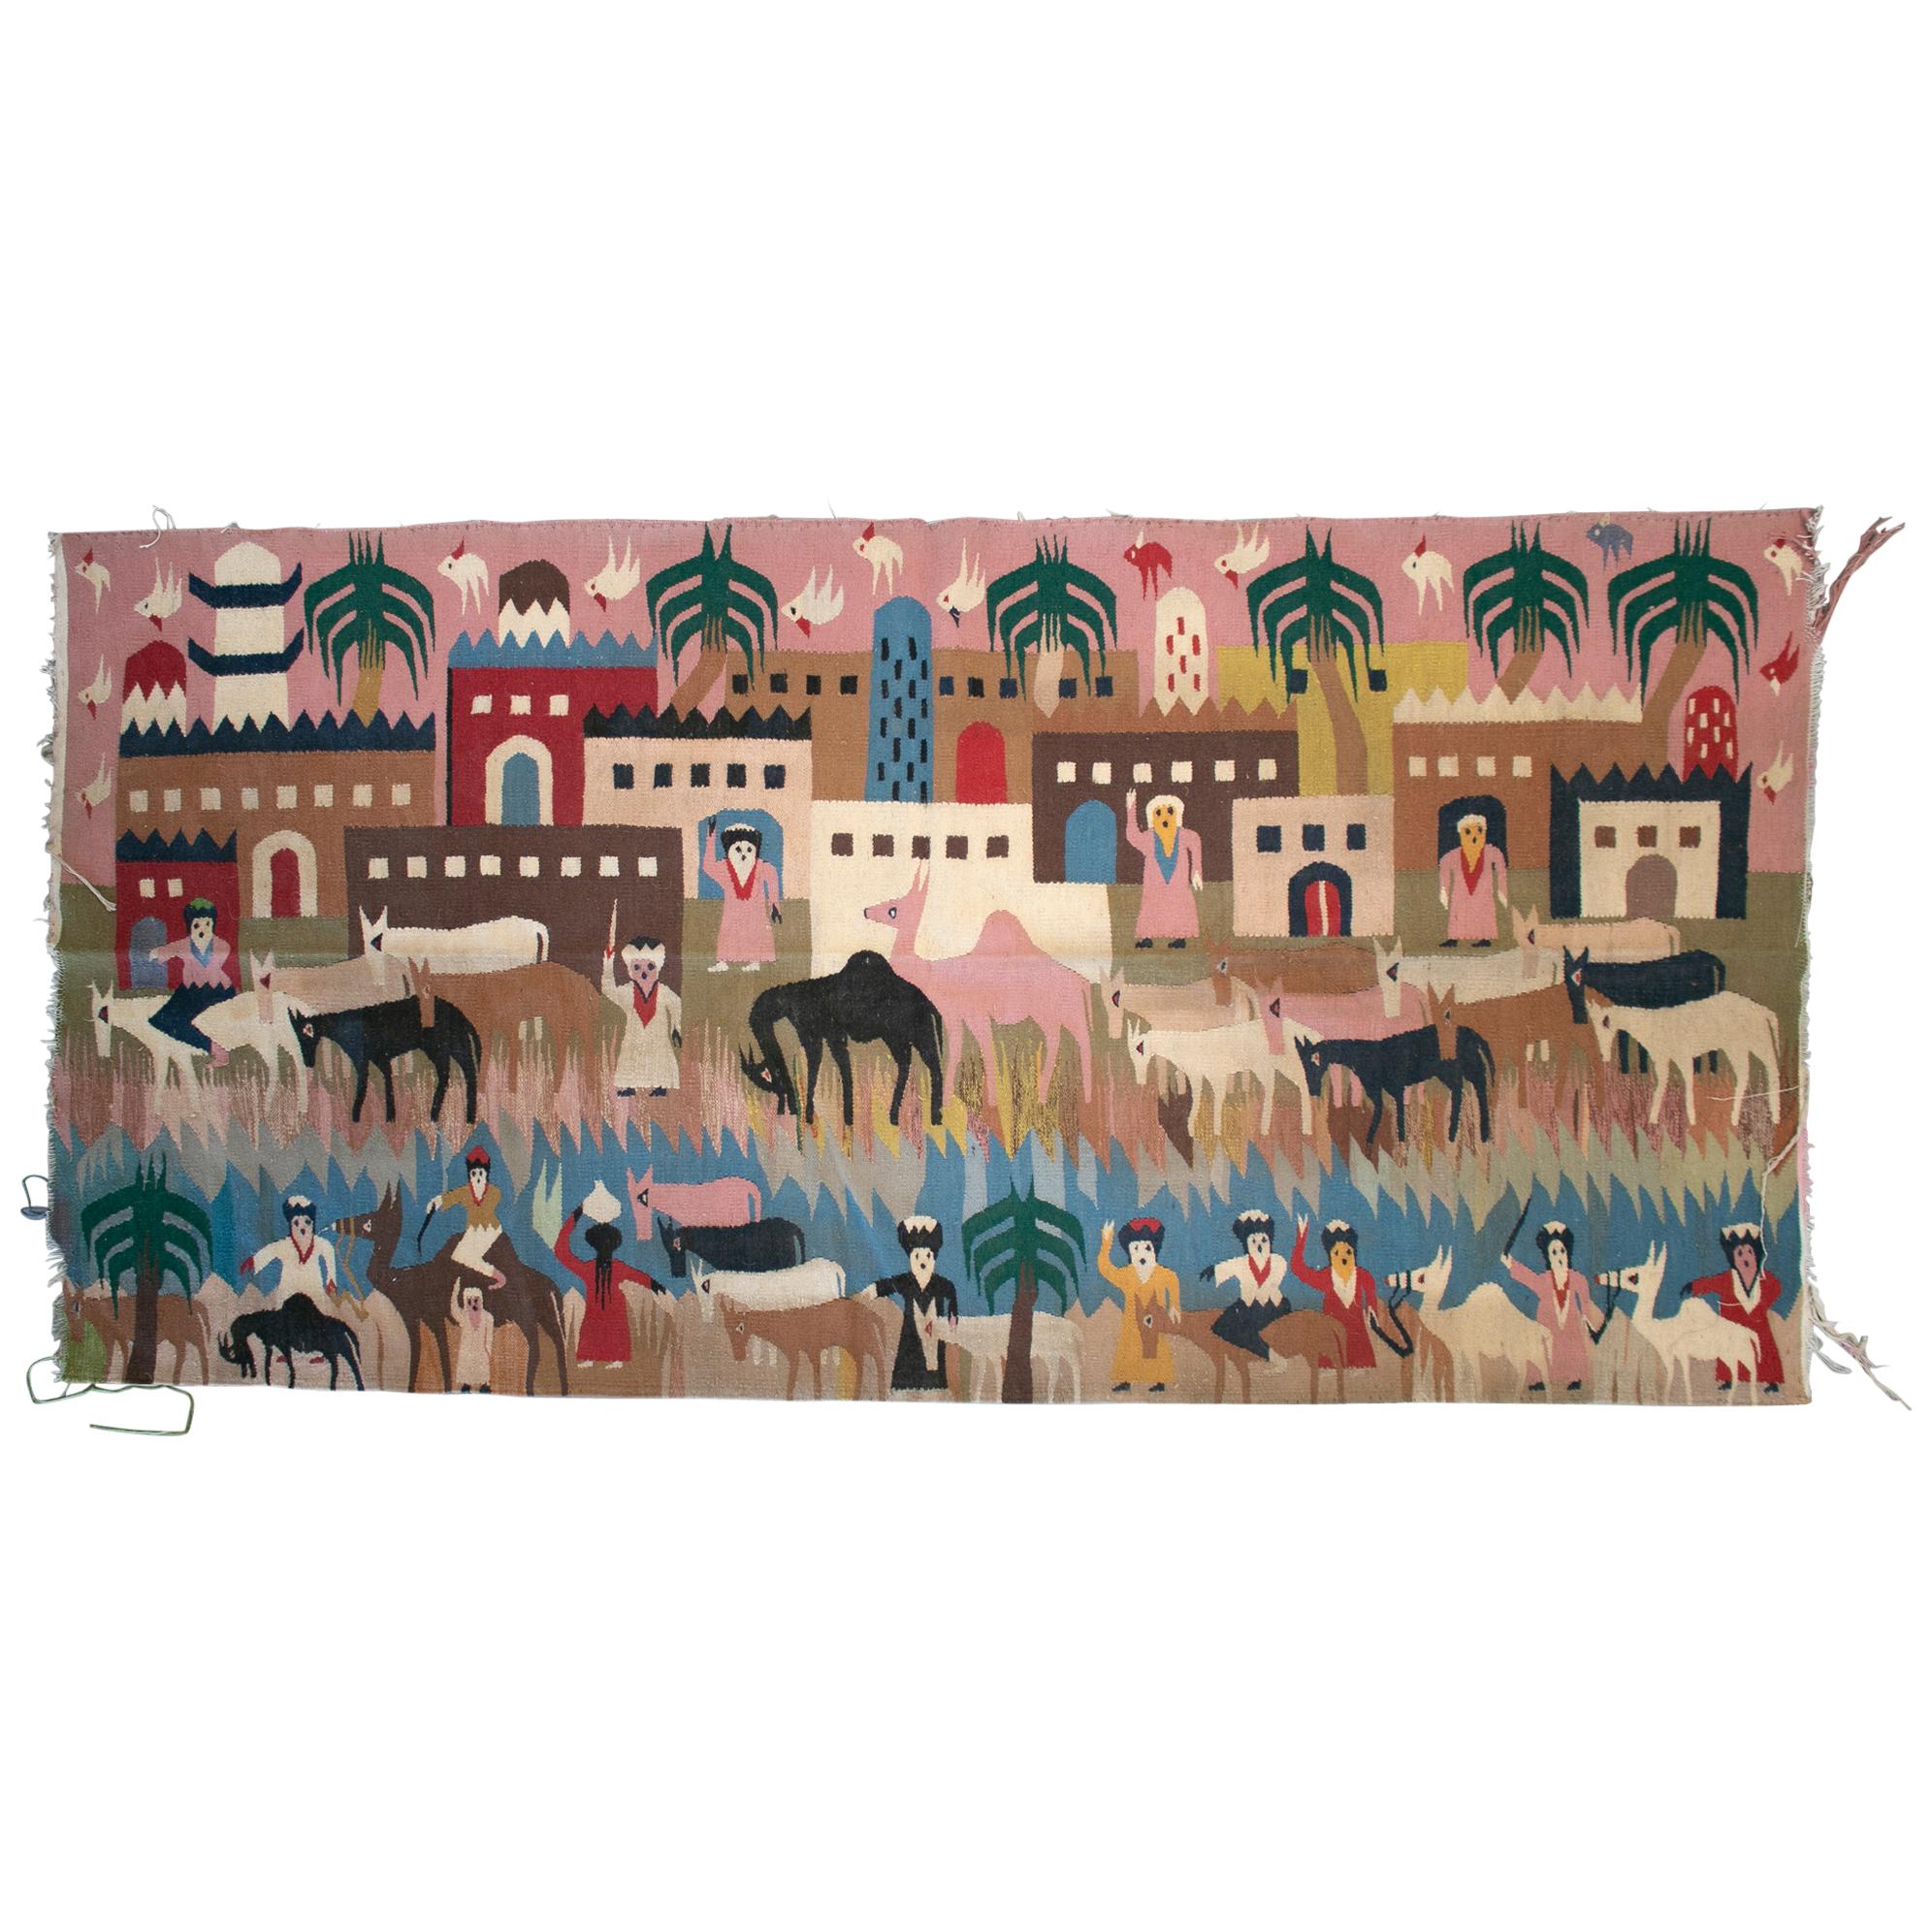 1930s Tapestry with Town Scenery